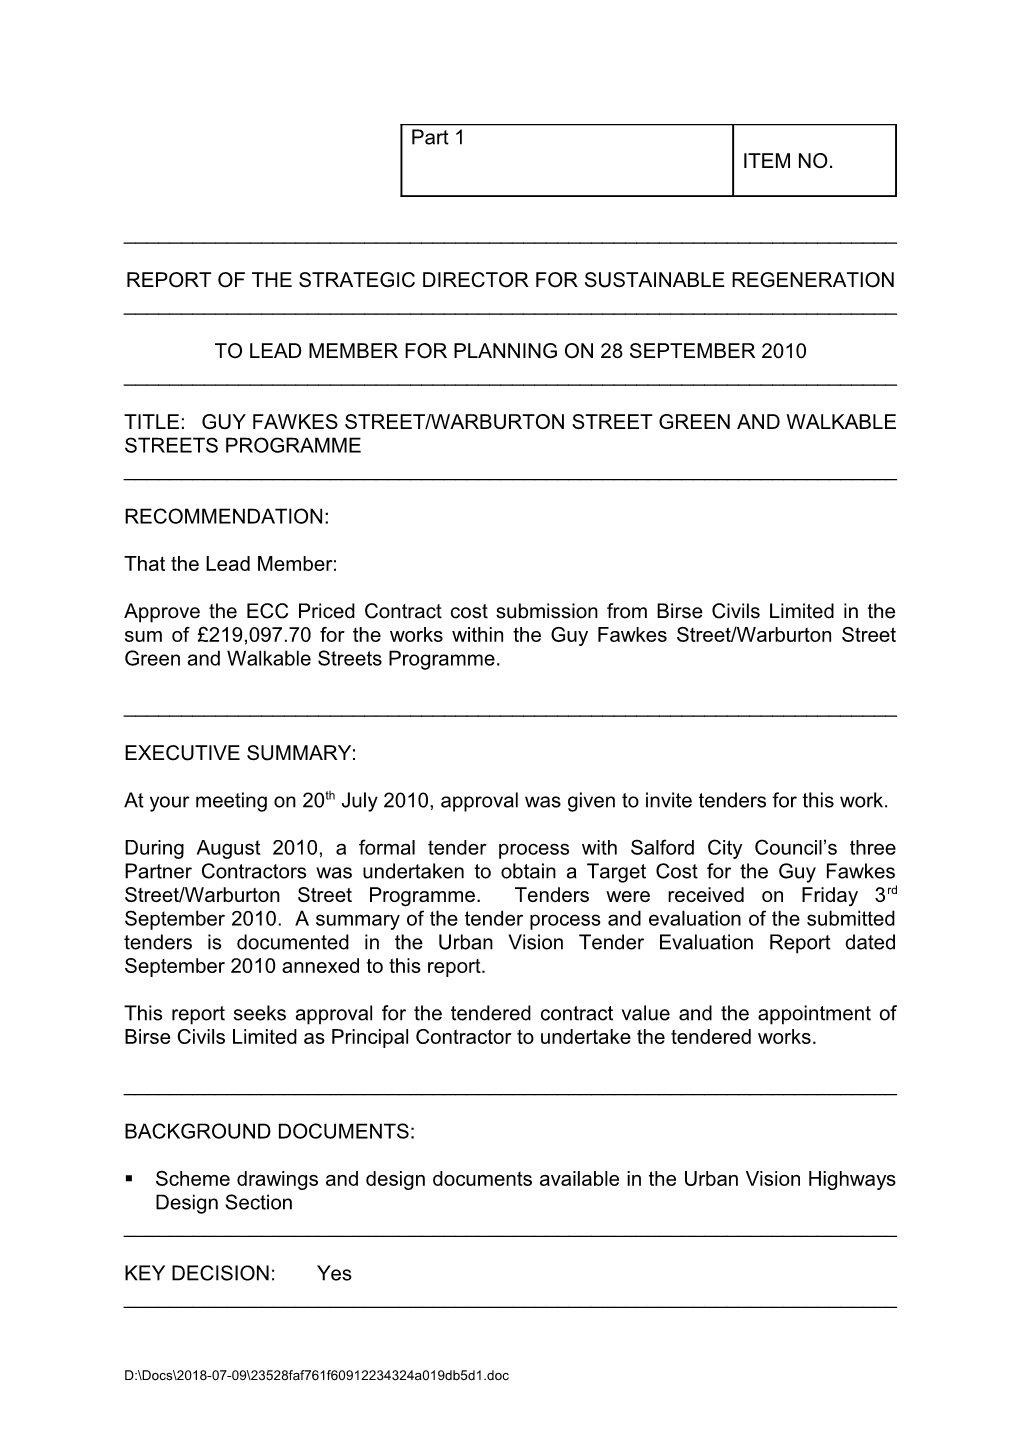 Report of the Strategic Director for Sustainable Regeneration s1